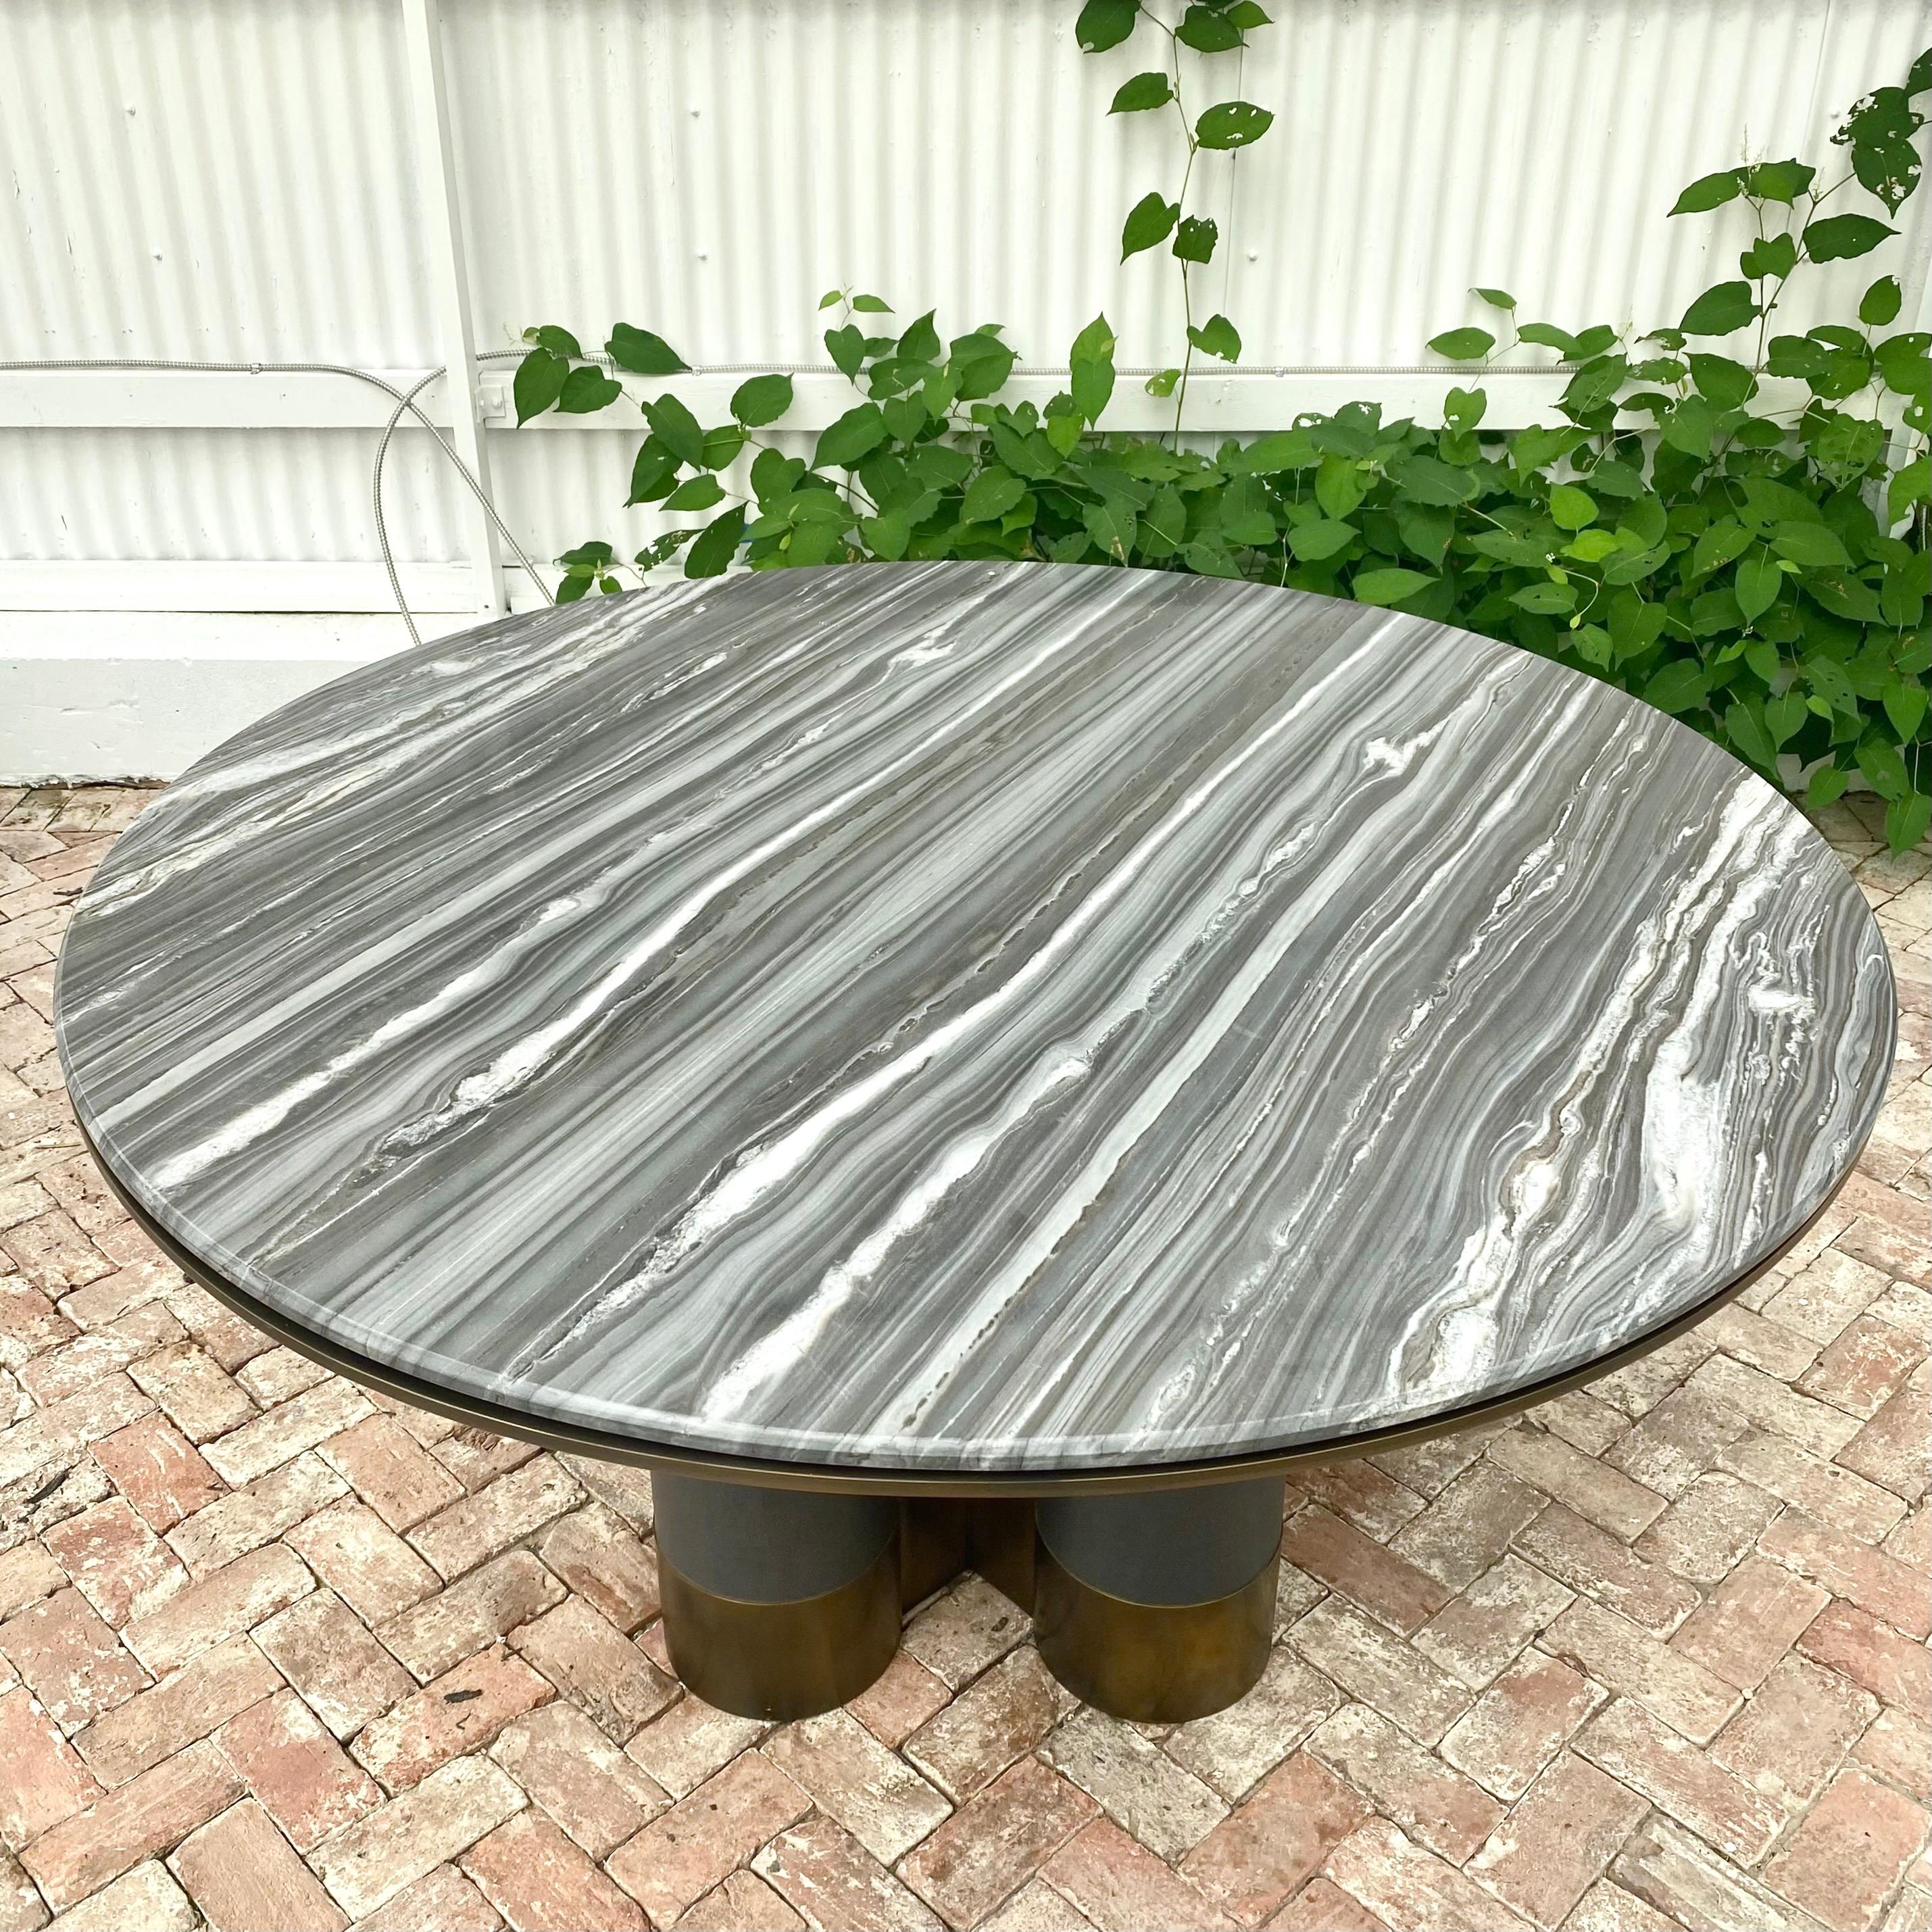 Large round marble dining table custom made for a client that needed to downsize to a smaller table. Palisandro Bluette marble polished top with gorgeous white streaking throughout. Has four cylindrical steel legs wrapped in dark grey leather and